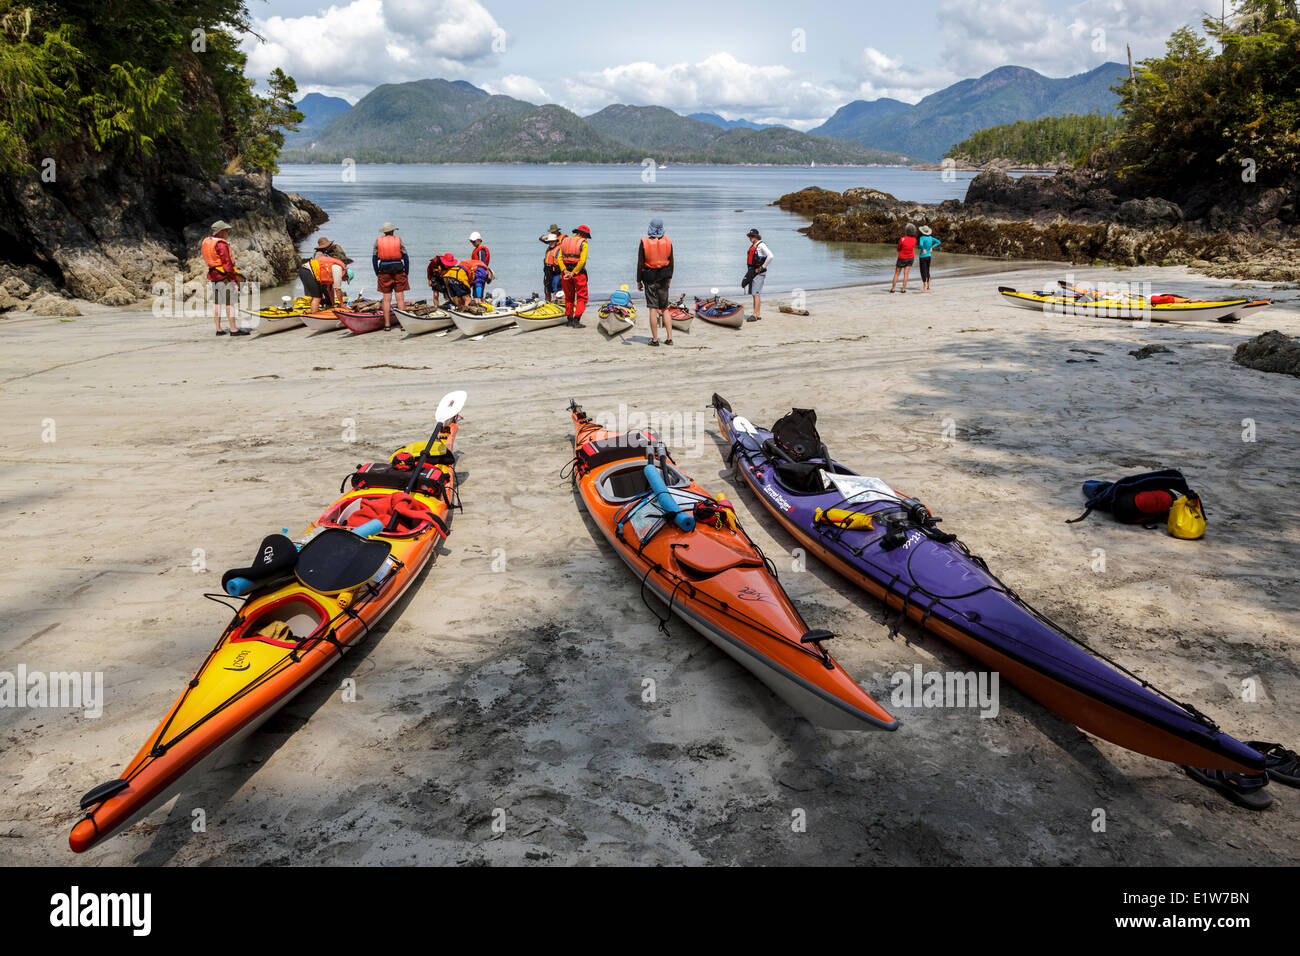 A guided kayak group prepare to depart from Rosa Island in Nuchatlitz Provincial Park on British Columbia's west coast, Canada. Stock Photo